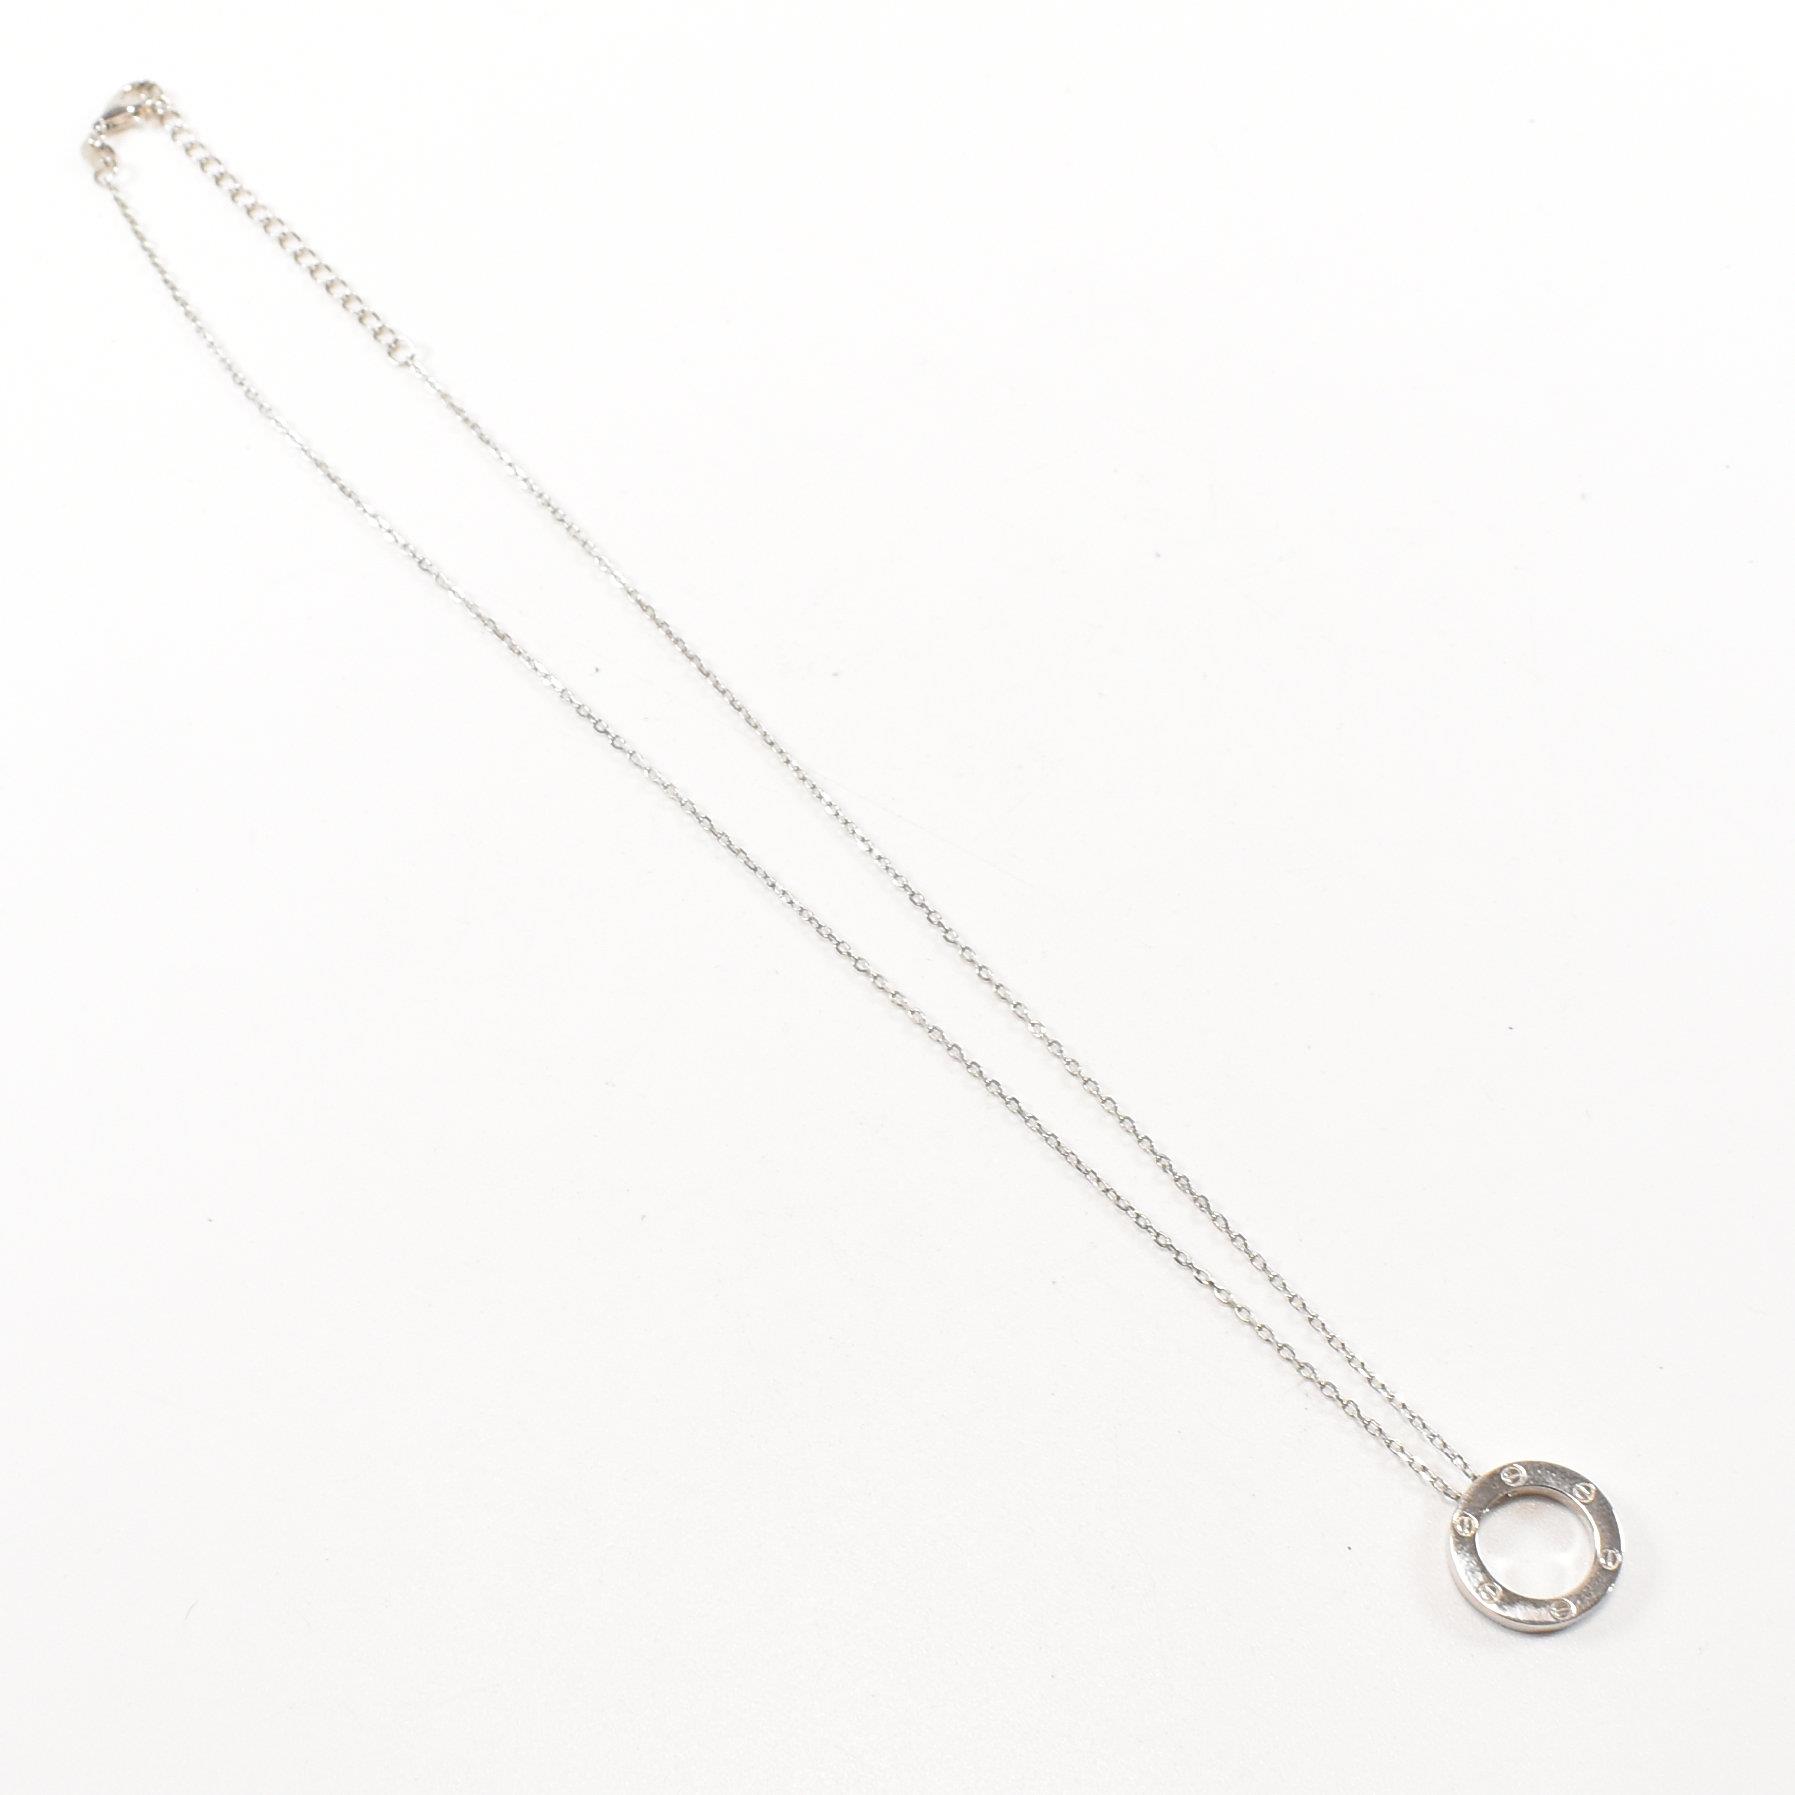 SILVER DESIGNER STYLE PENDANT NECKLACE - Image 5 of 7